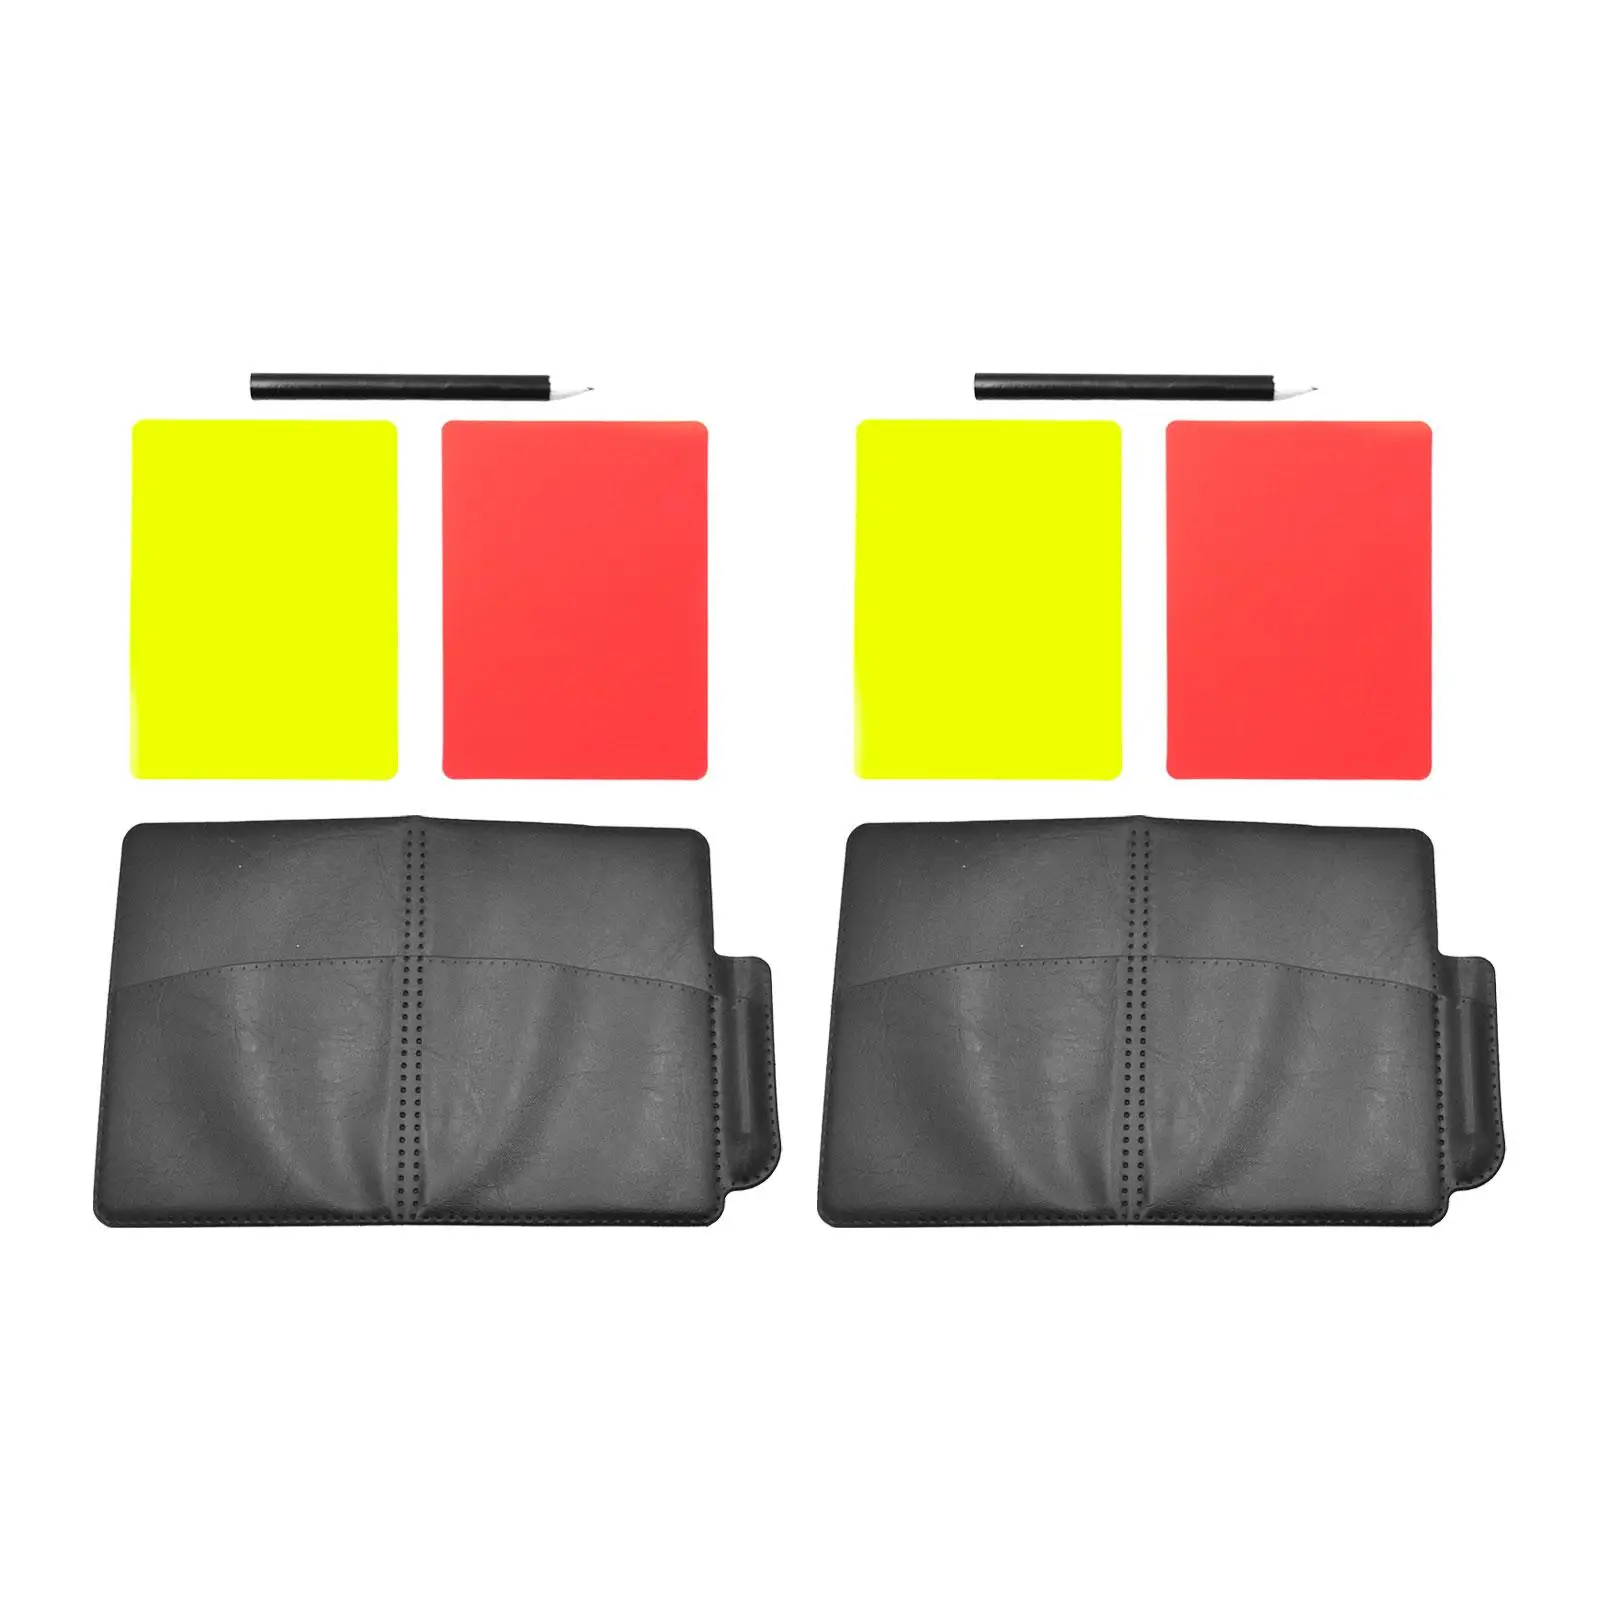 Soccer Referee Card Sets Pencil Accessories for Football Basketball Training